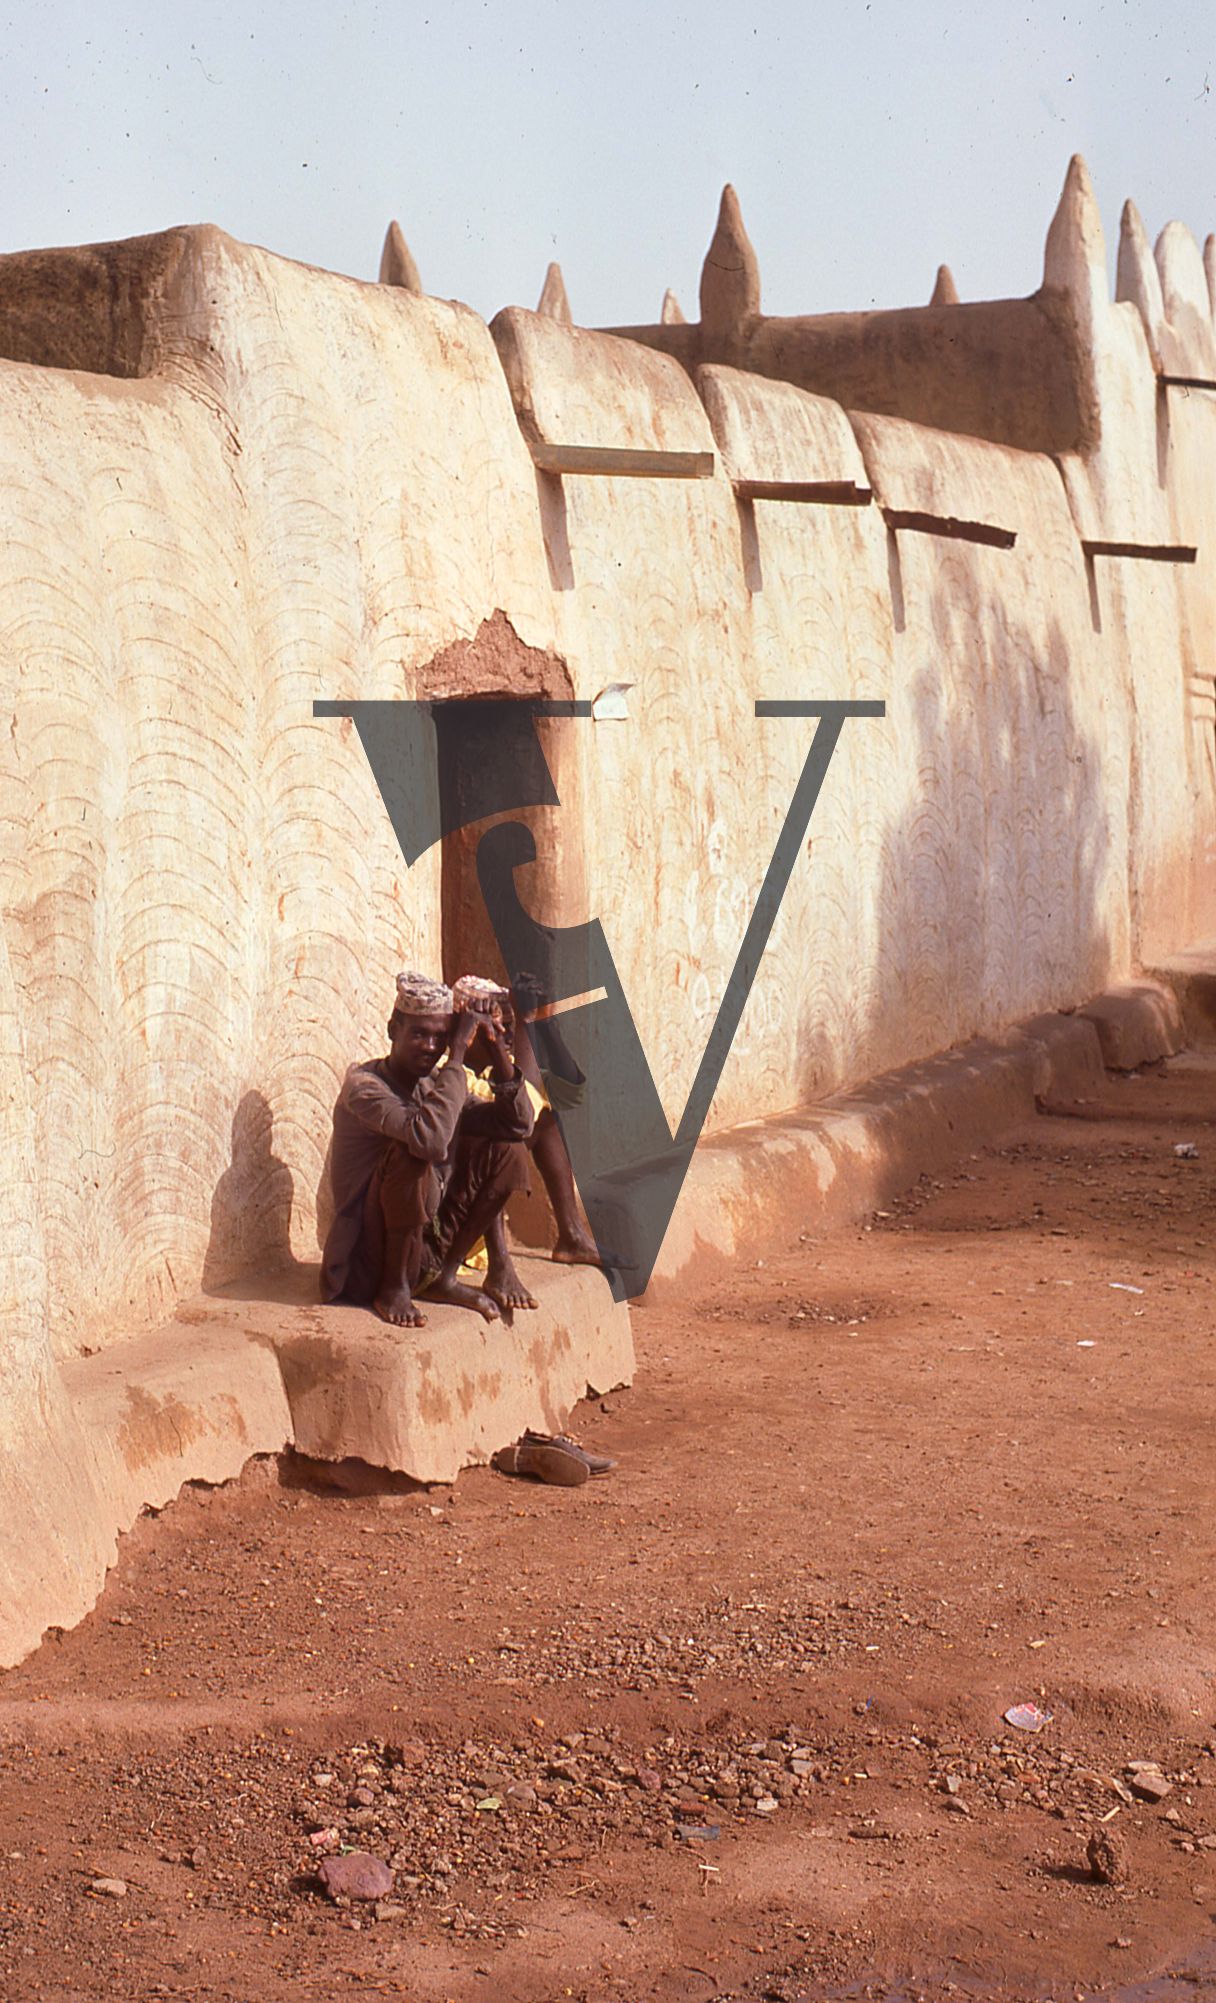 Nigeria, two men seated at base of wall.